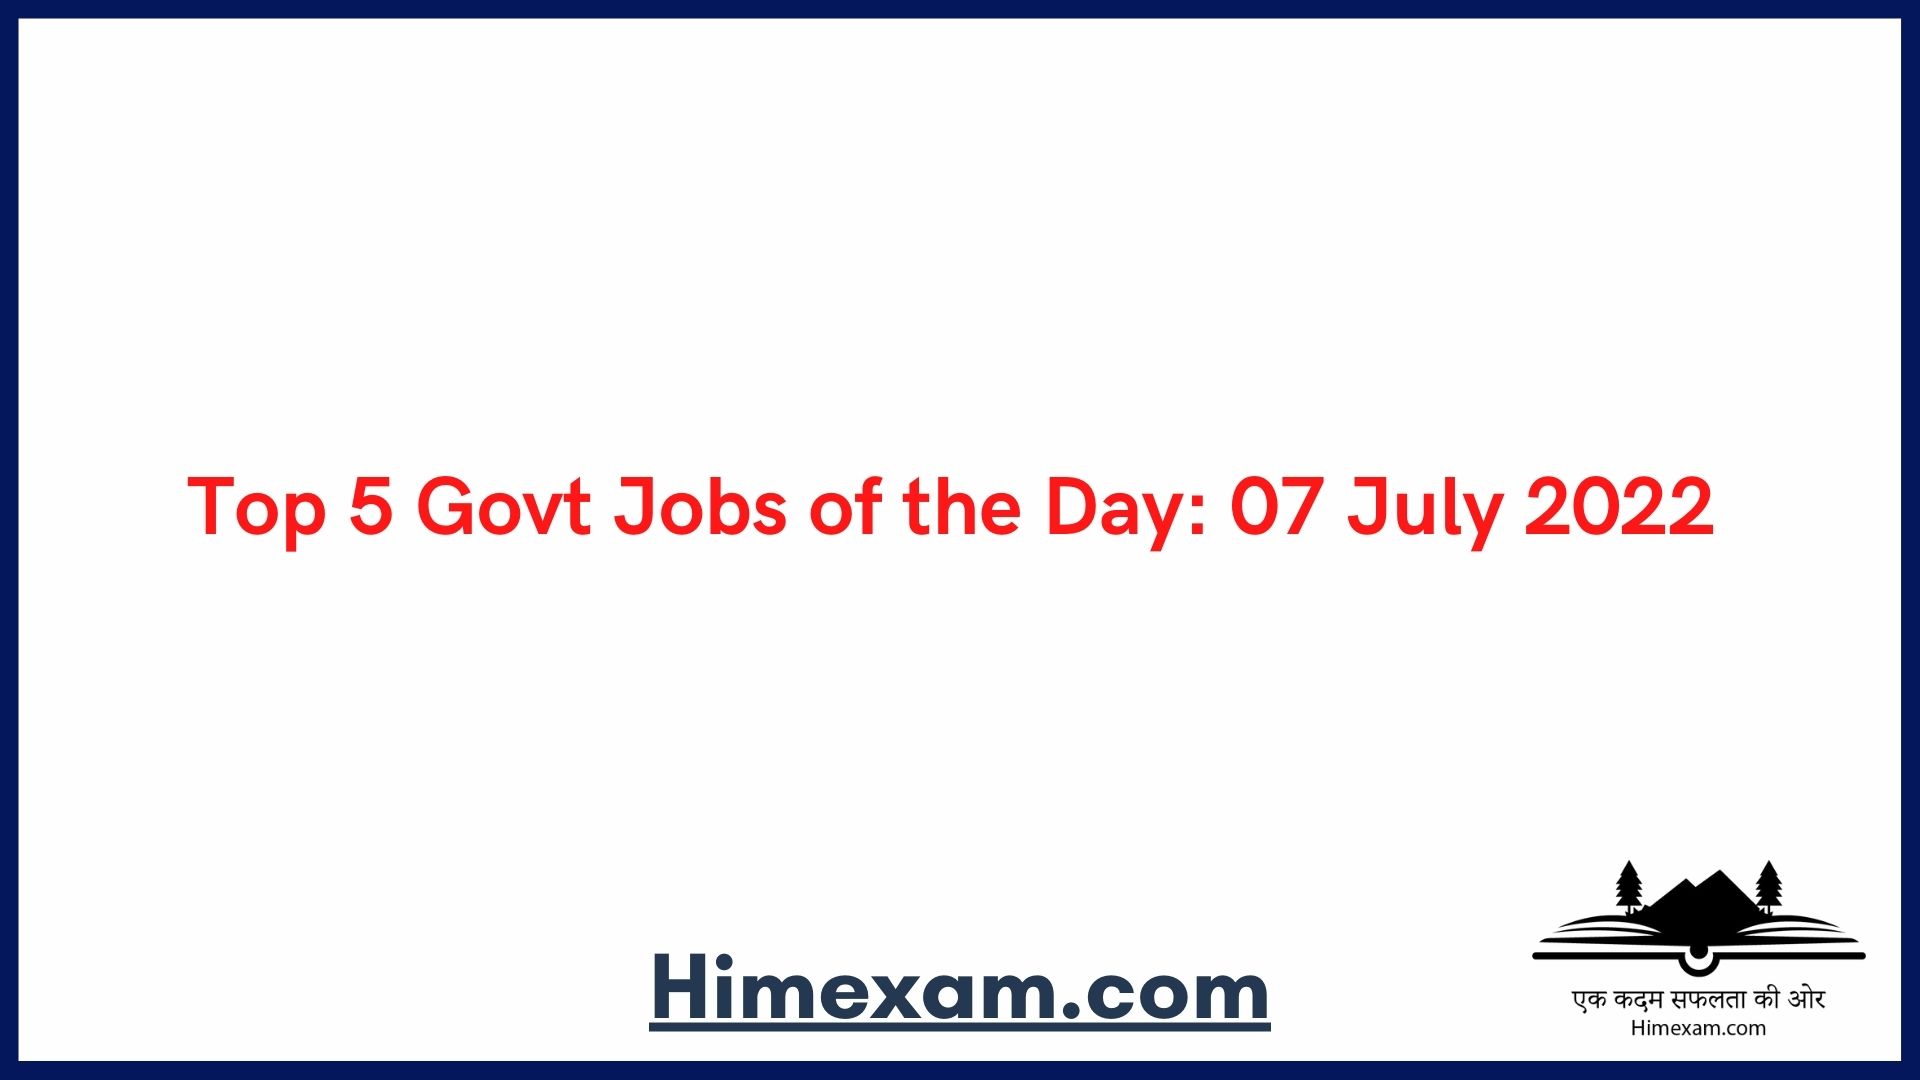 Top 5 Govt Jobs of the Day: 07 July 2022